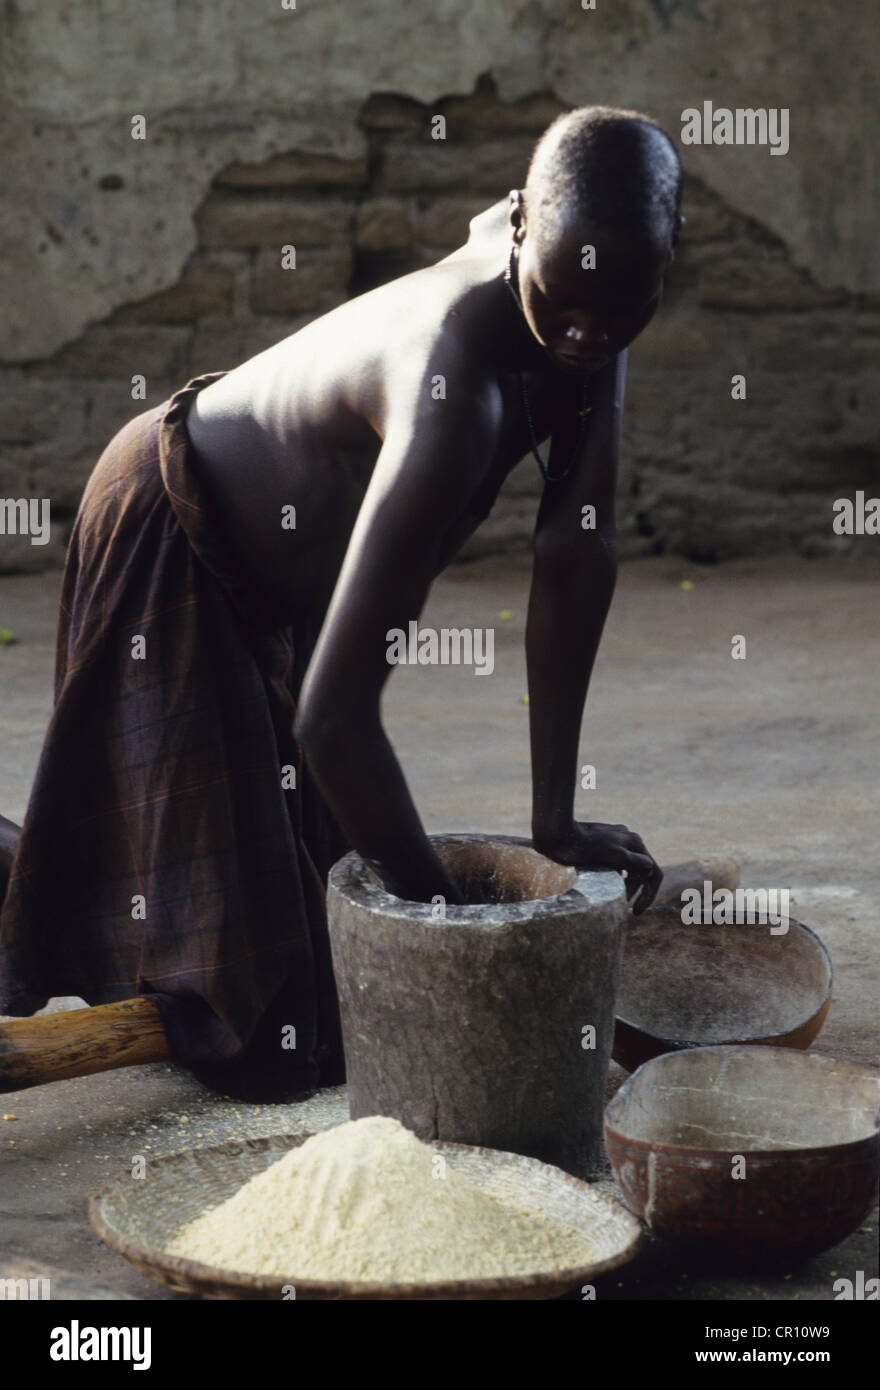 A Dinka woman pounds grains in Thiet feeding camp in Southern Sudan. Stock Photo